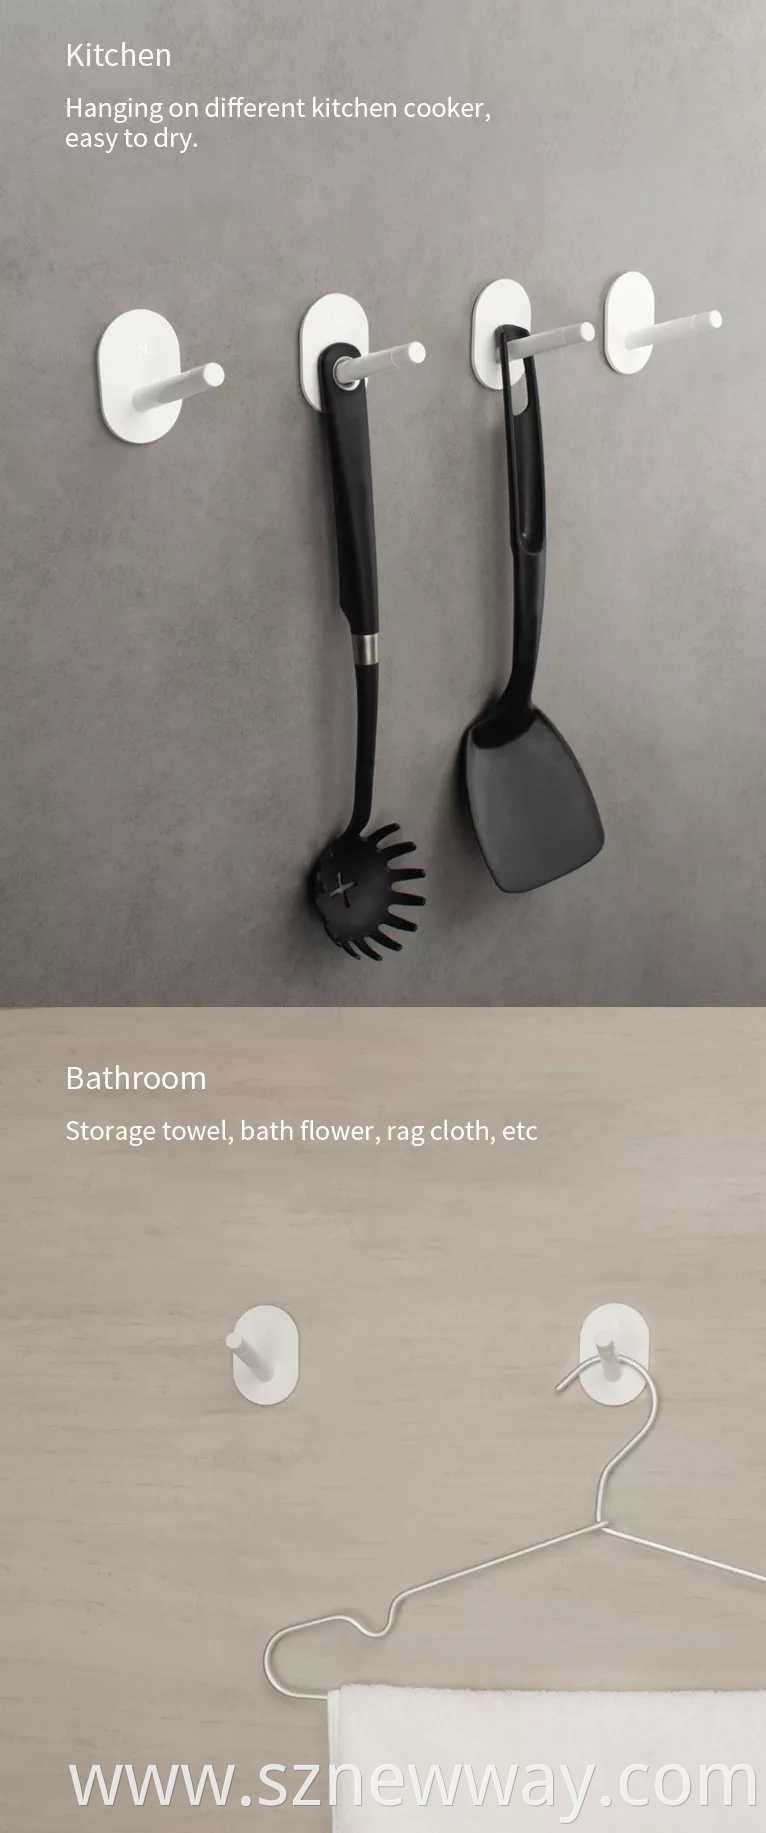 Xiaomi Wall Hooks For Clothes